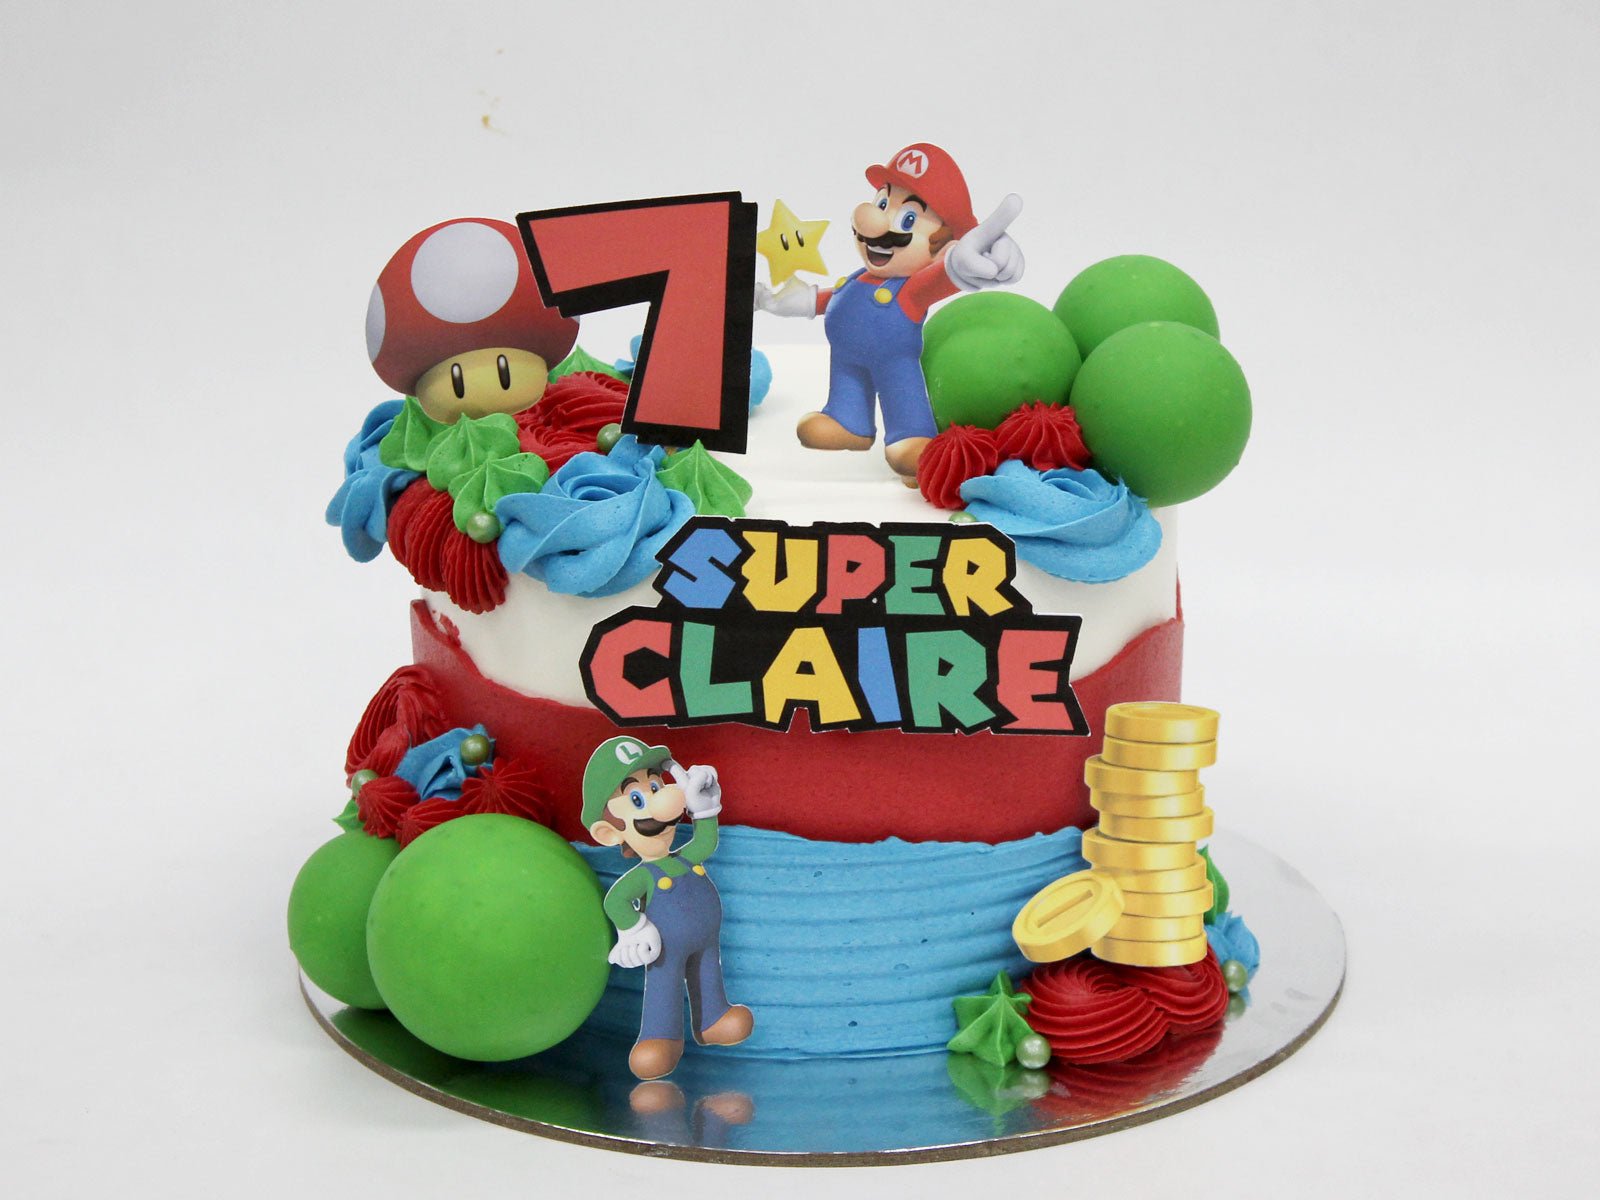 Get Your Game On with Super Mario Cakes | CreamOne